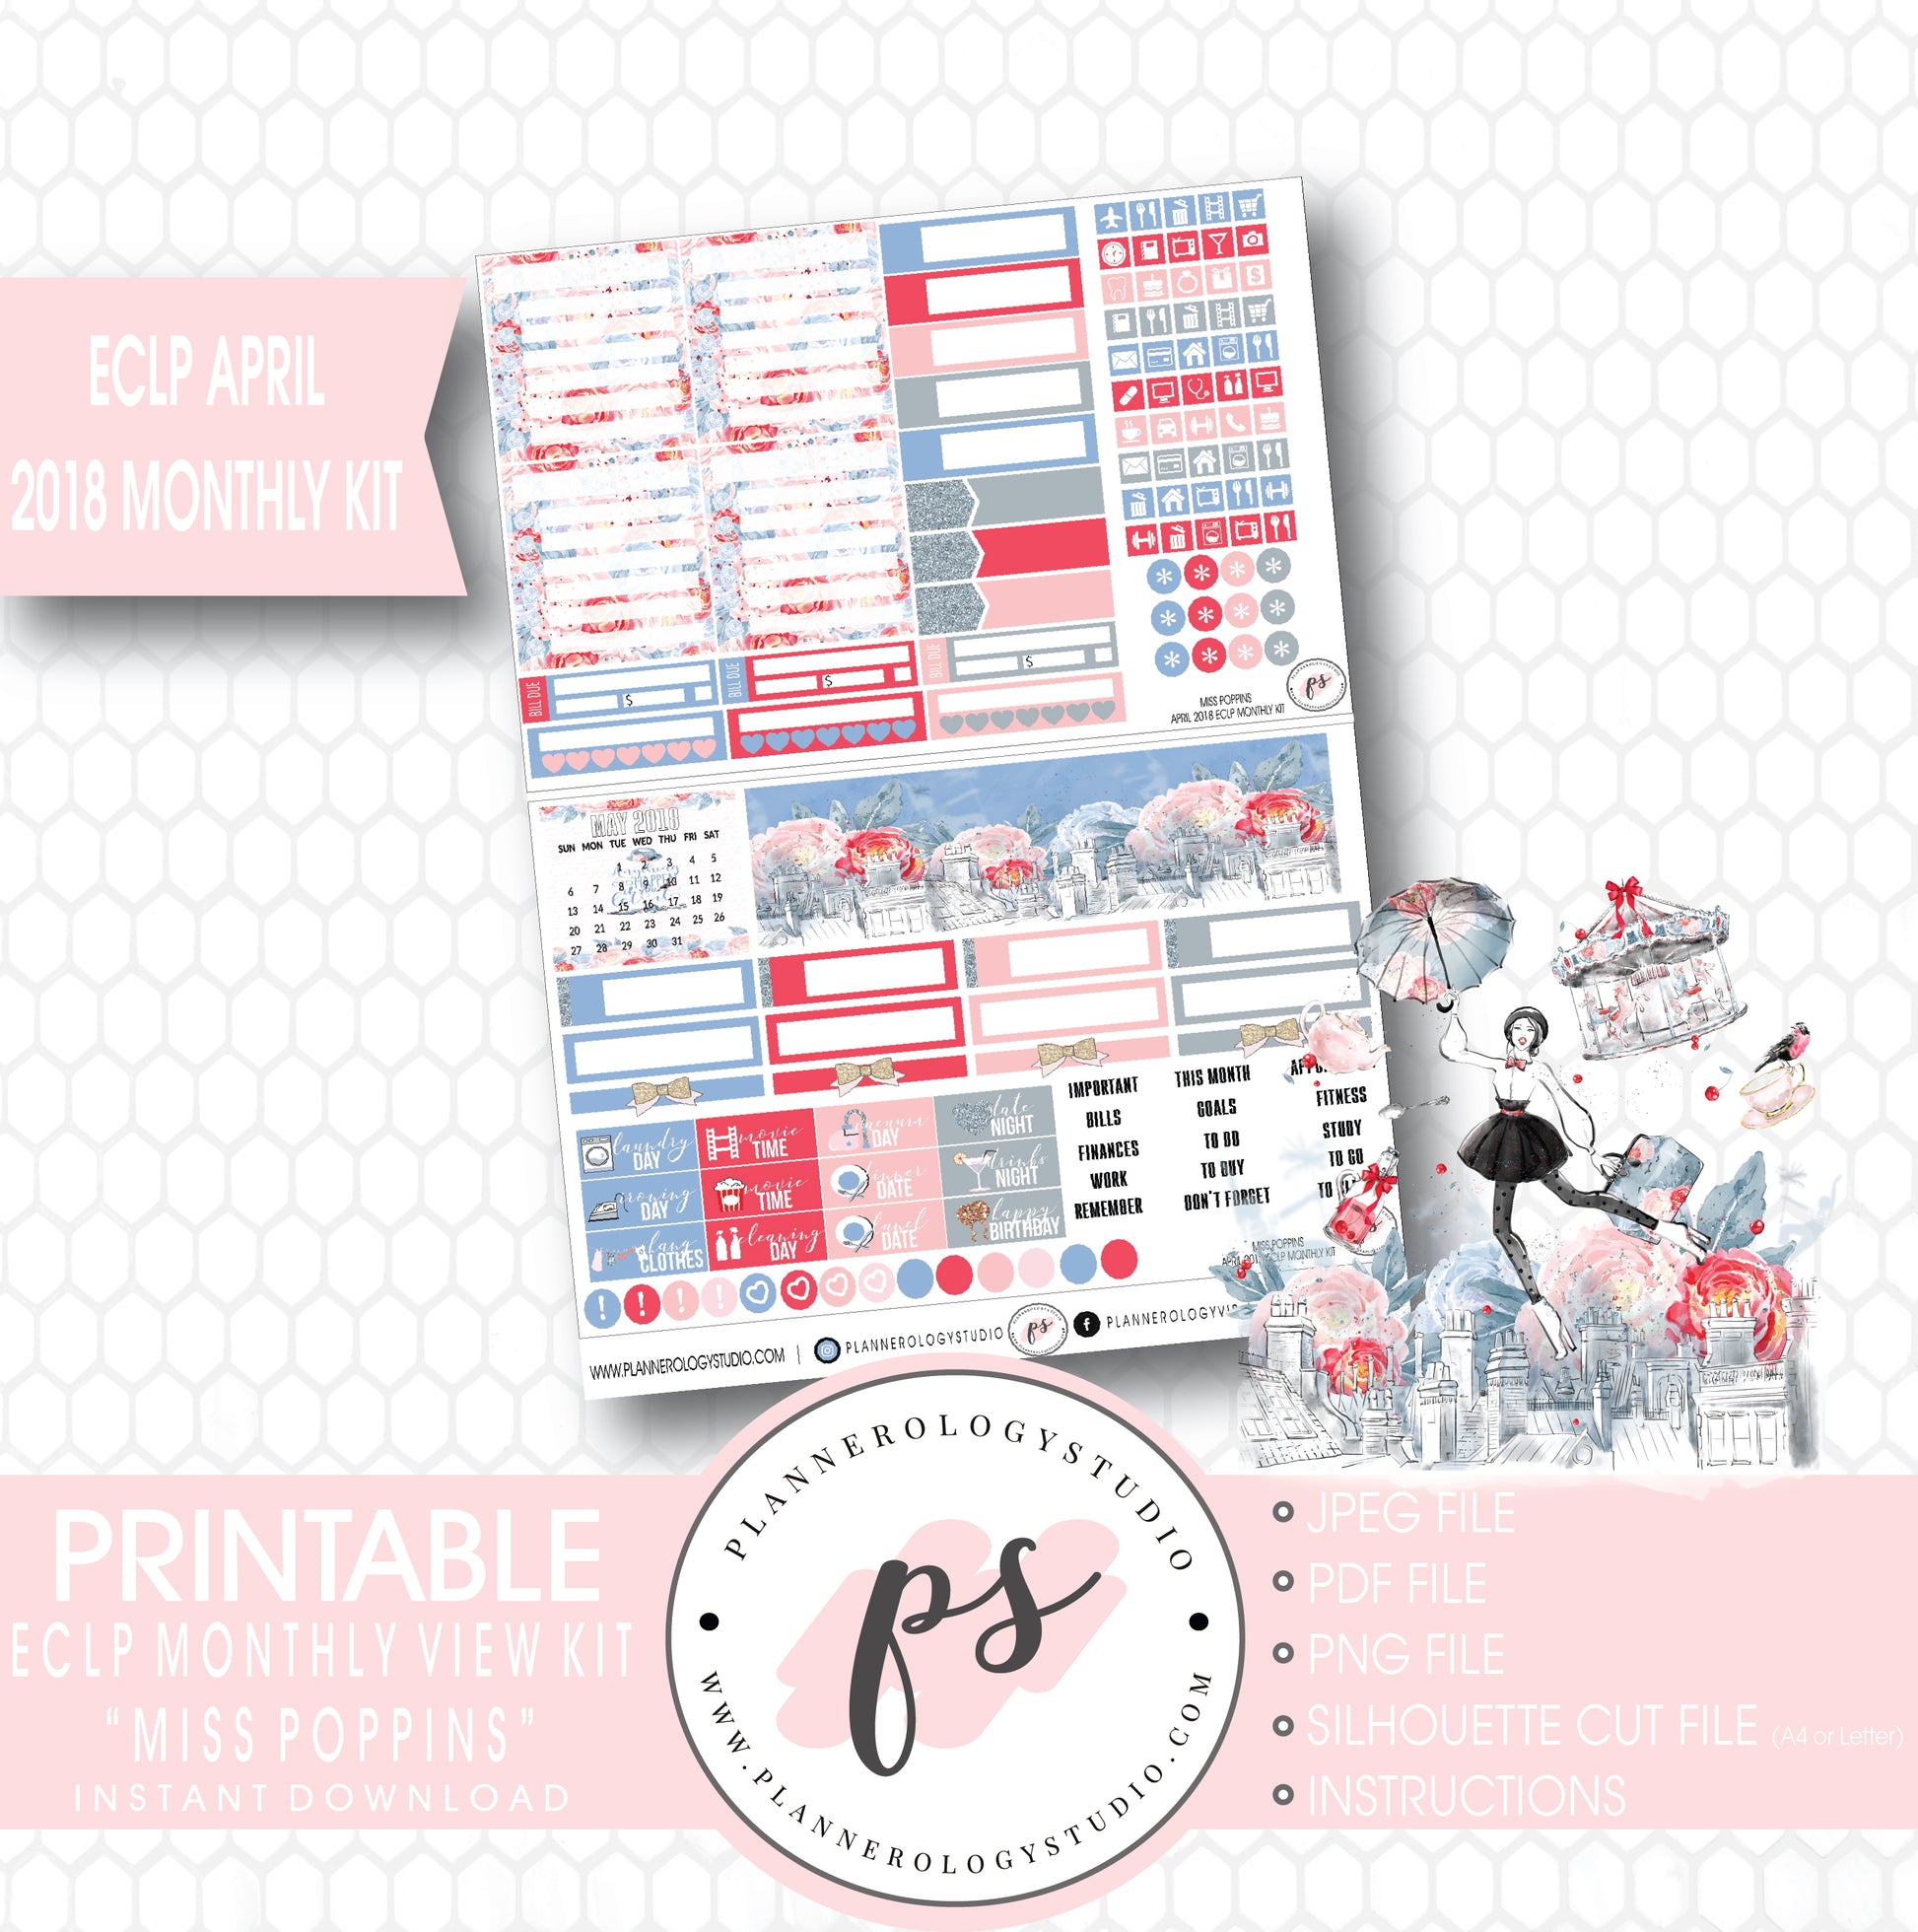 Miss Poppins (Mary Poppins) April 2018 Monthly View Kit Digital Printable Planner Stickers (for use with Erin Condren) - Plannerologystudio